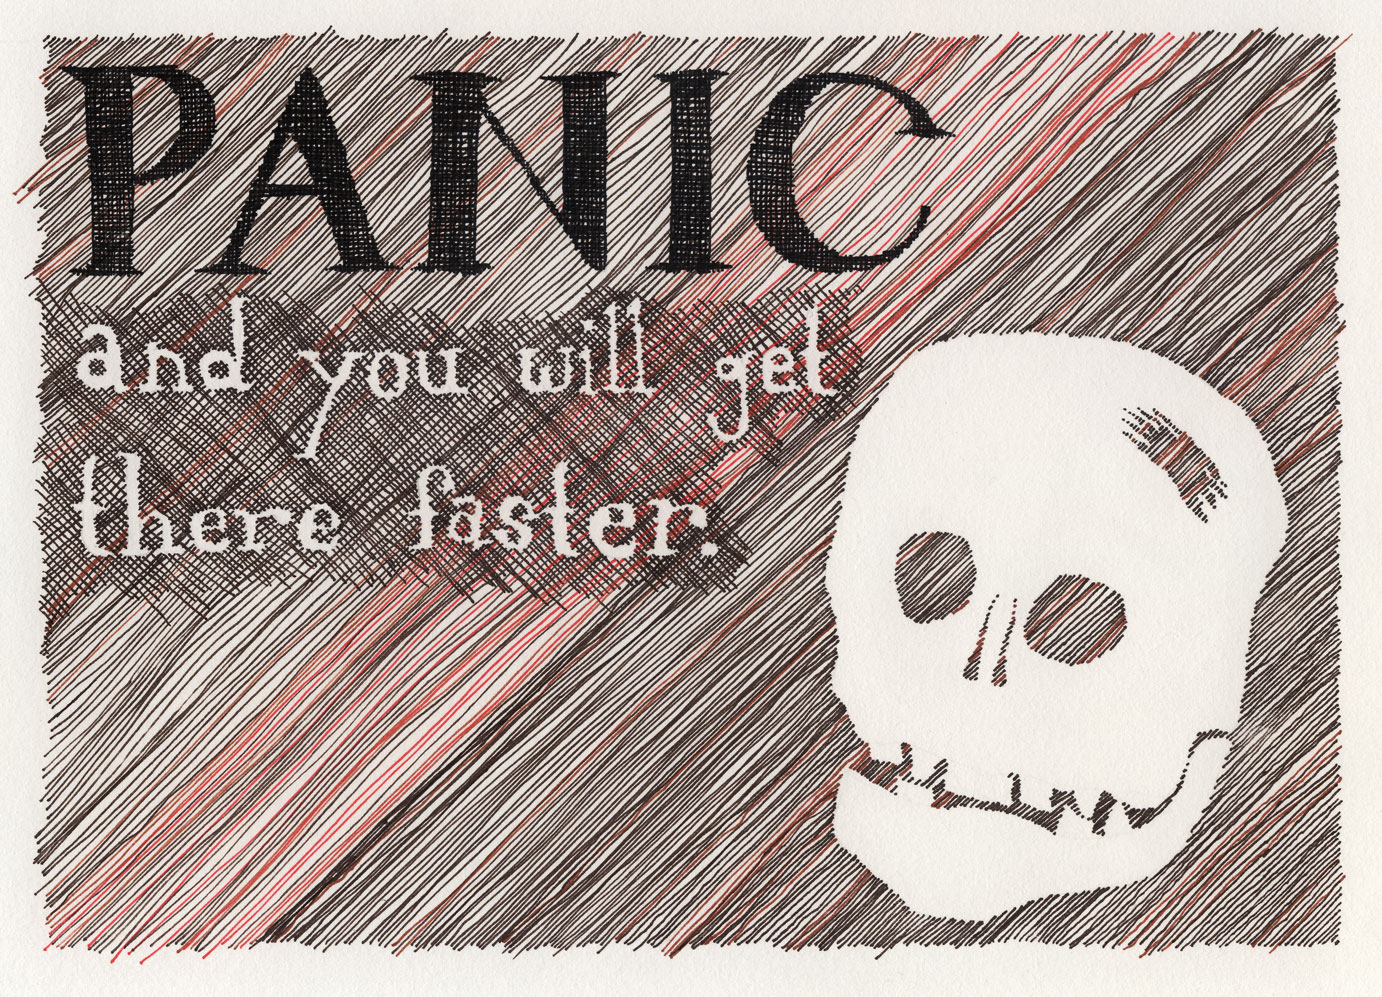 PANIC and you will get there faster.